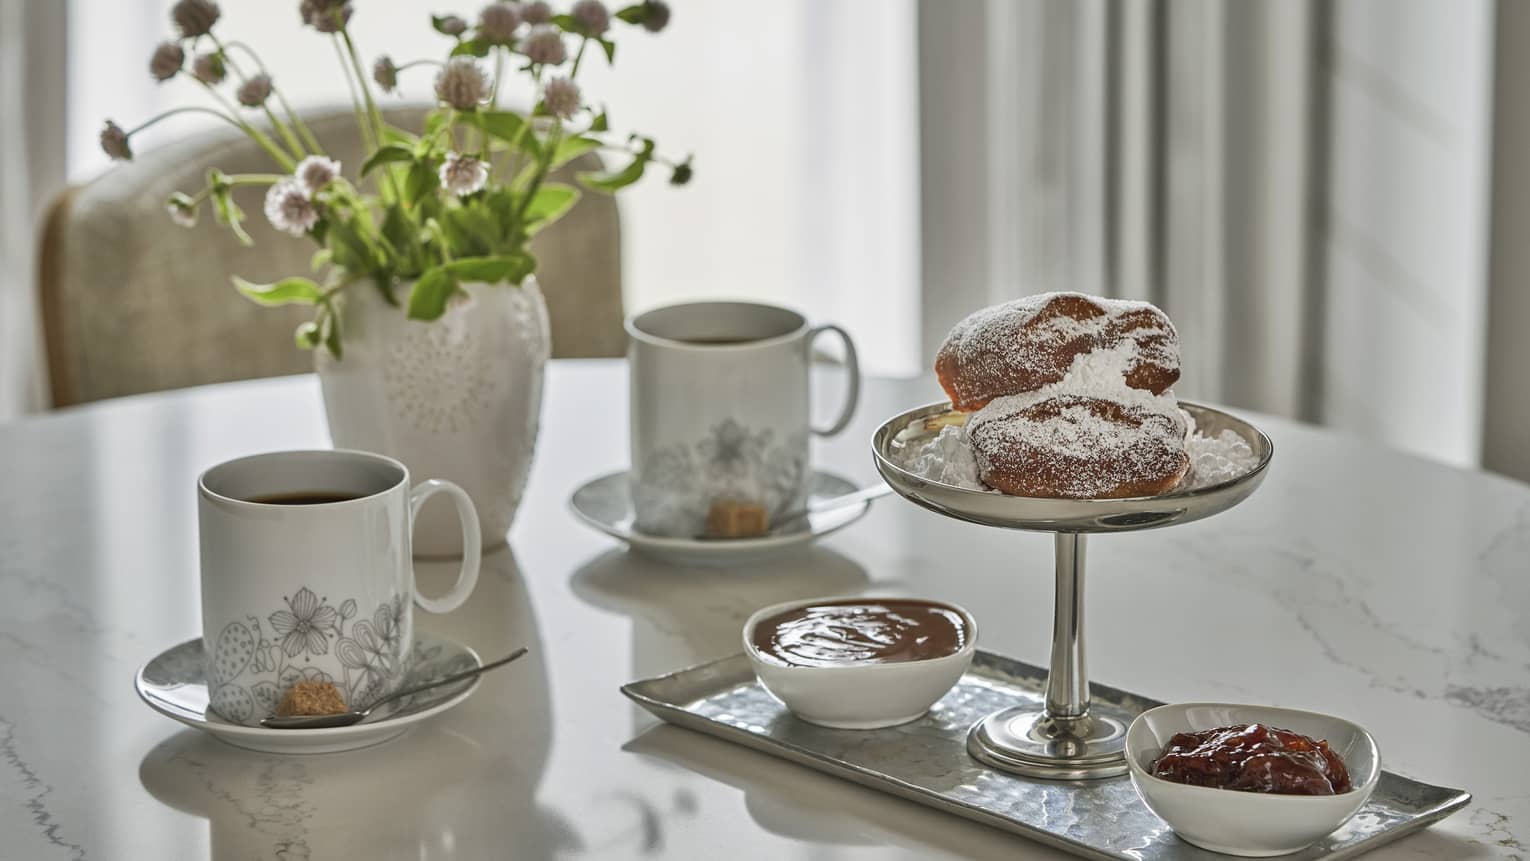 Marble-topped table with a silver tray of beignets and condiments, two mugs of coffee and a vase of fresh wildflowers